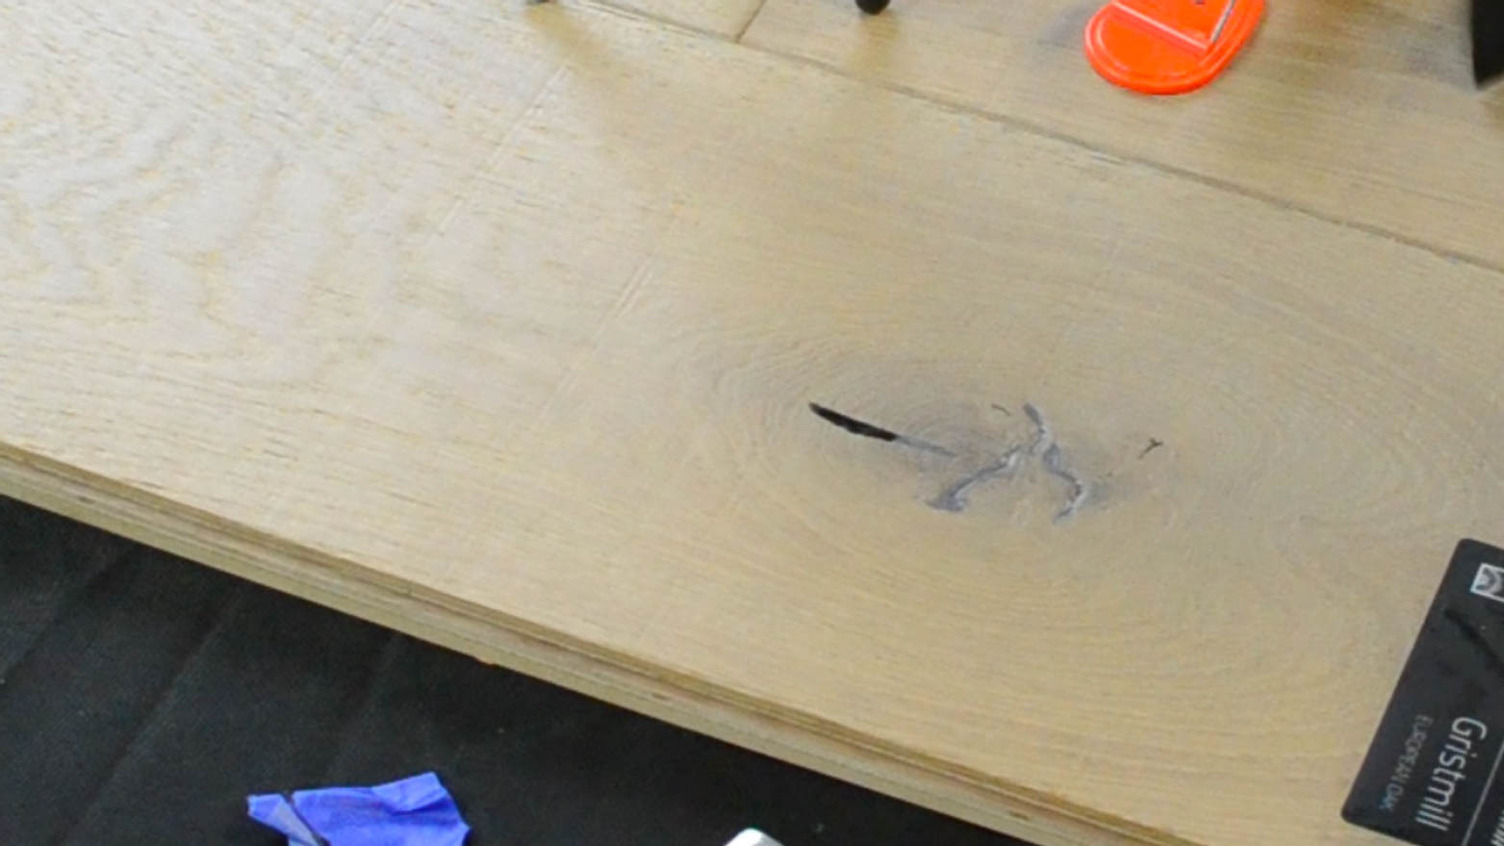 repairing a wood floor knot with wax